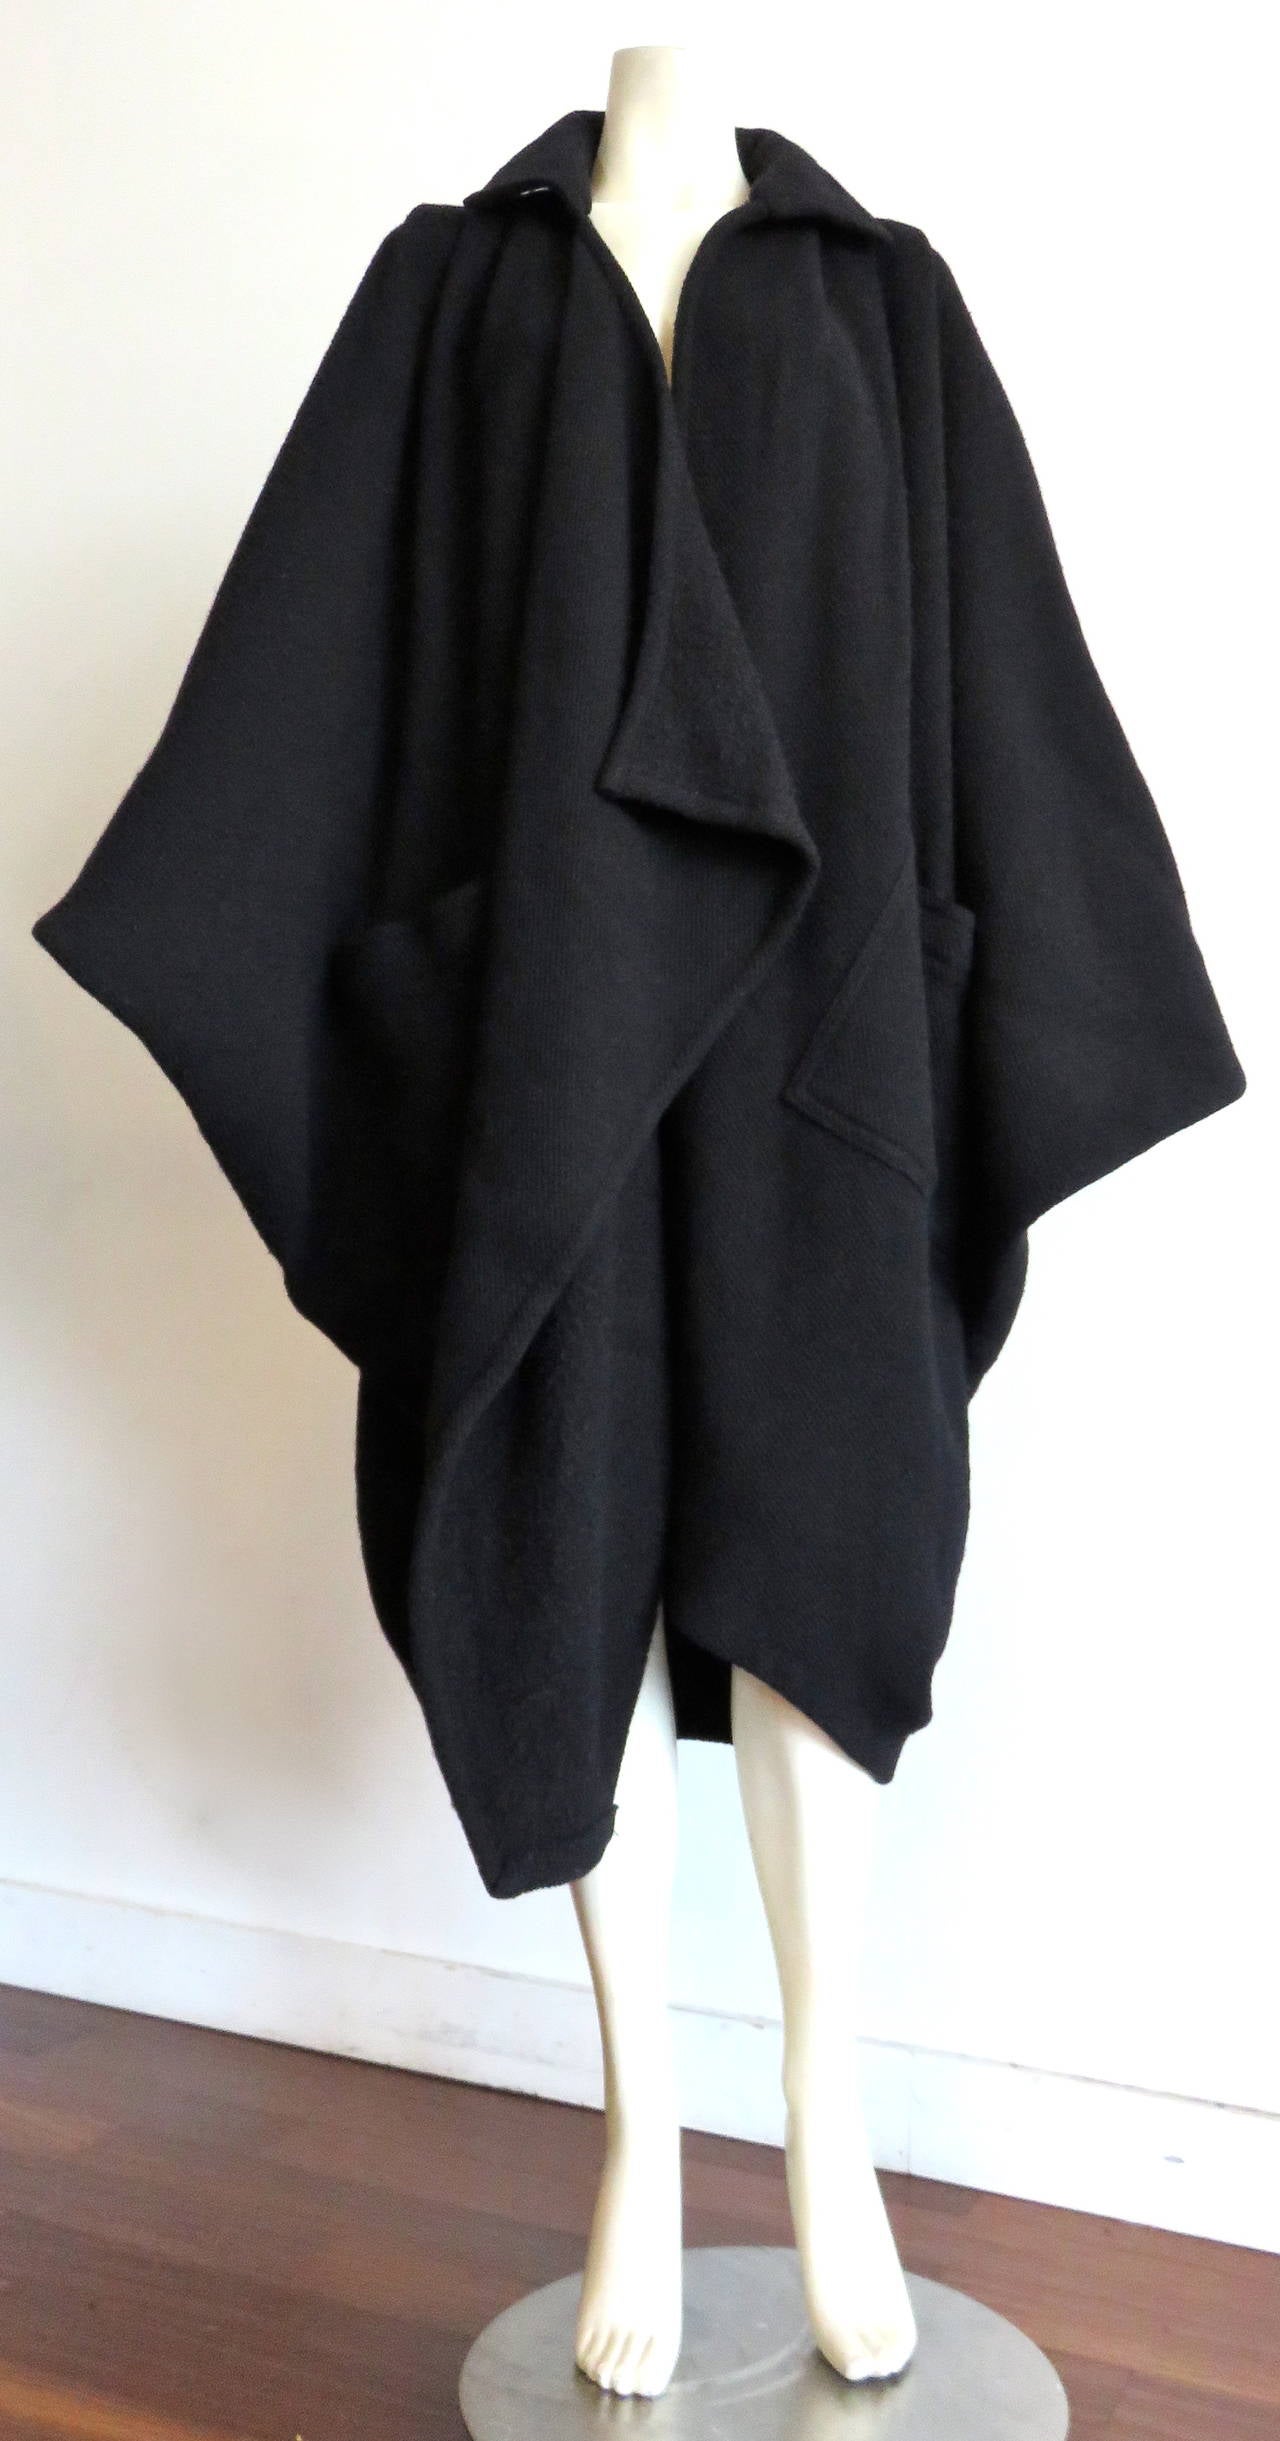 Fabulous, 1976, ISSEY MIYAKE, black, oversized batwing/cocoon coat in wool twill, woven fabric.

Open front design with twin patch pockets at the waist level.

Voluminous, diamond-shape silhouette with pleated construction at the front shoulders